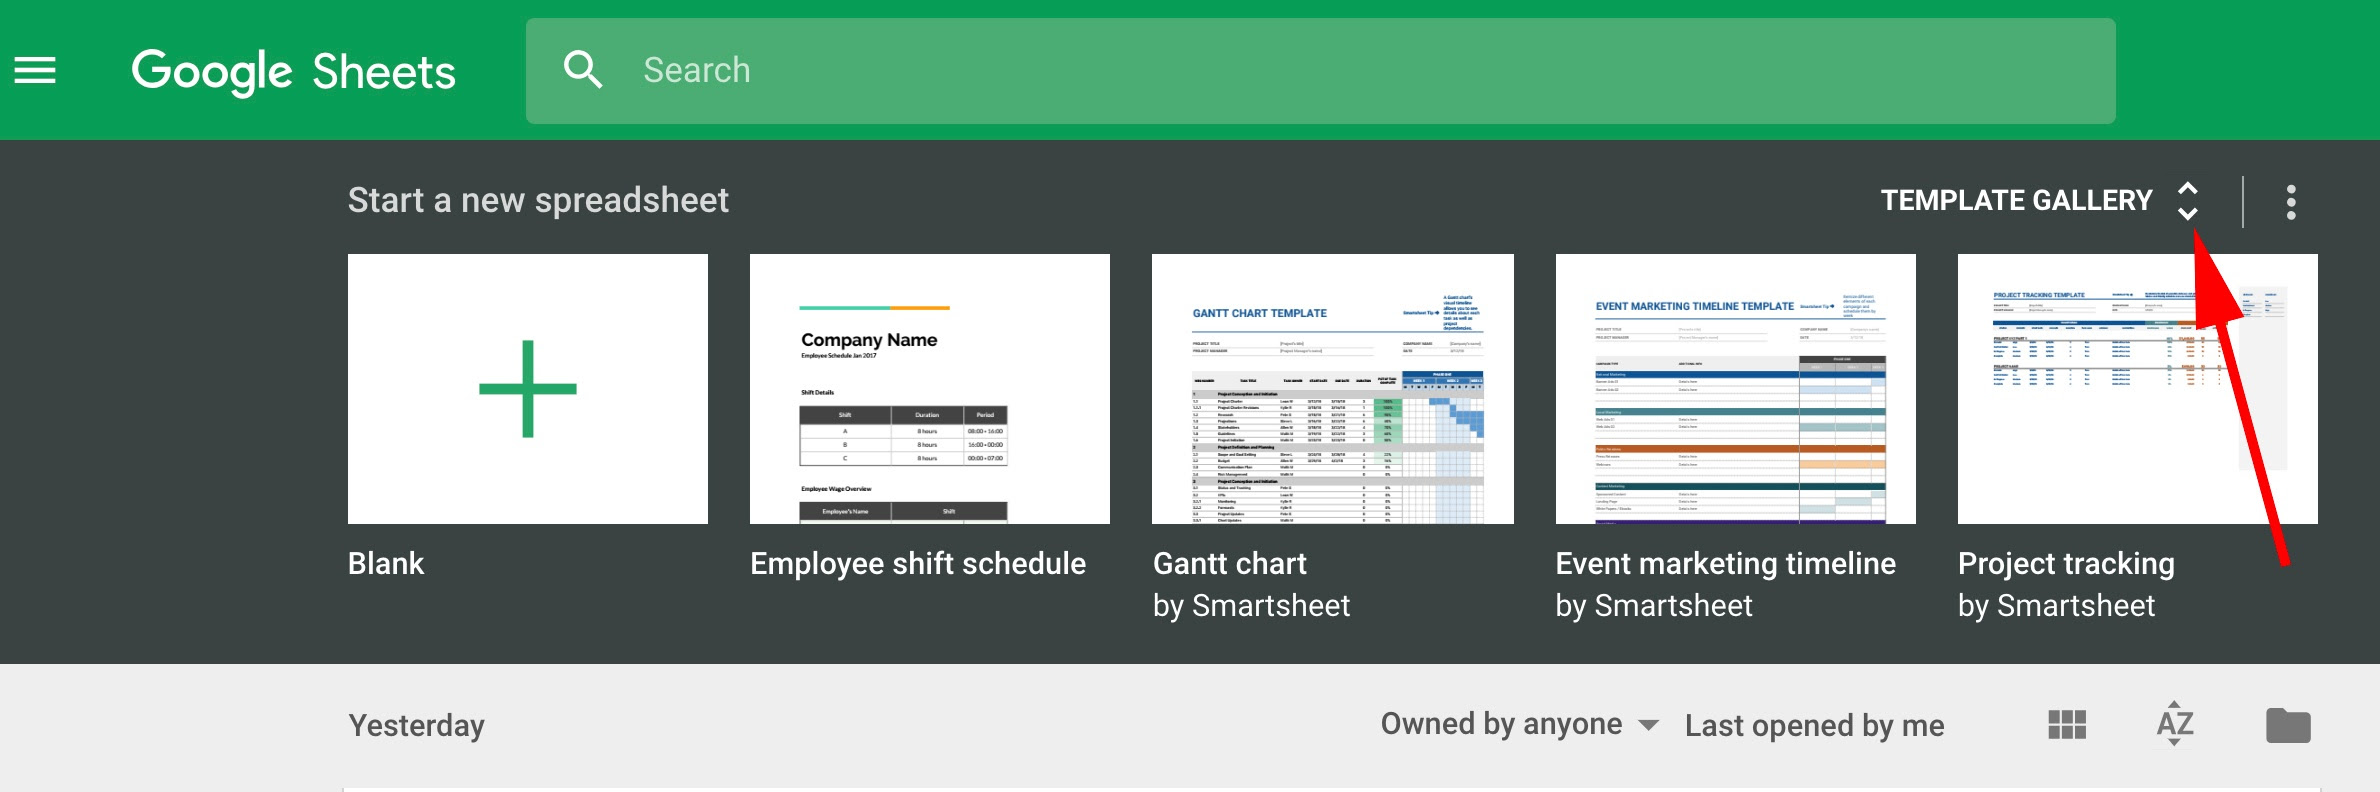 11 of the Best Free Google Sheets Templates for 2020 IAC